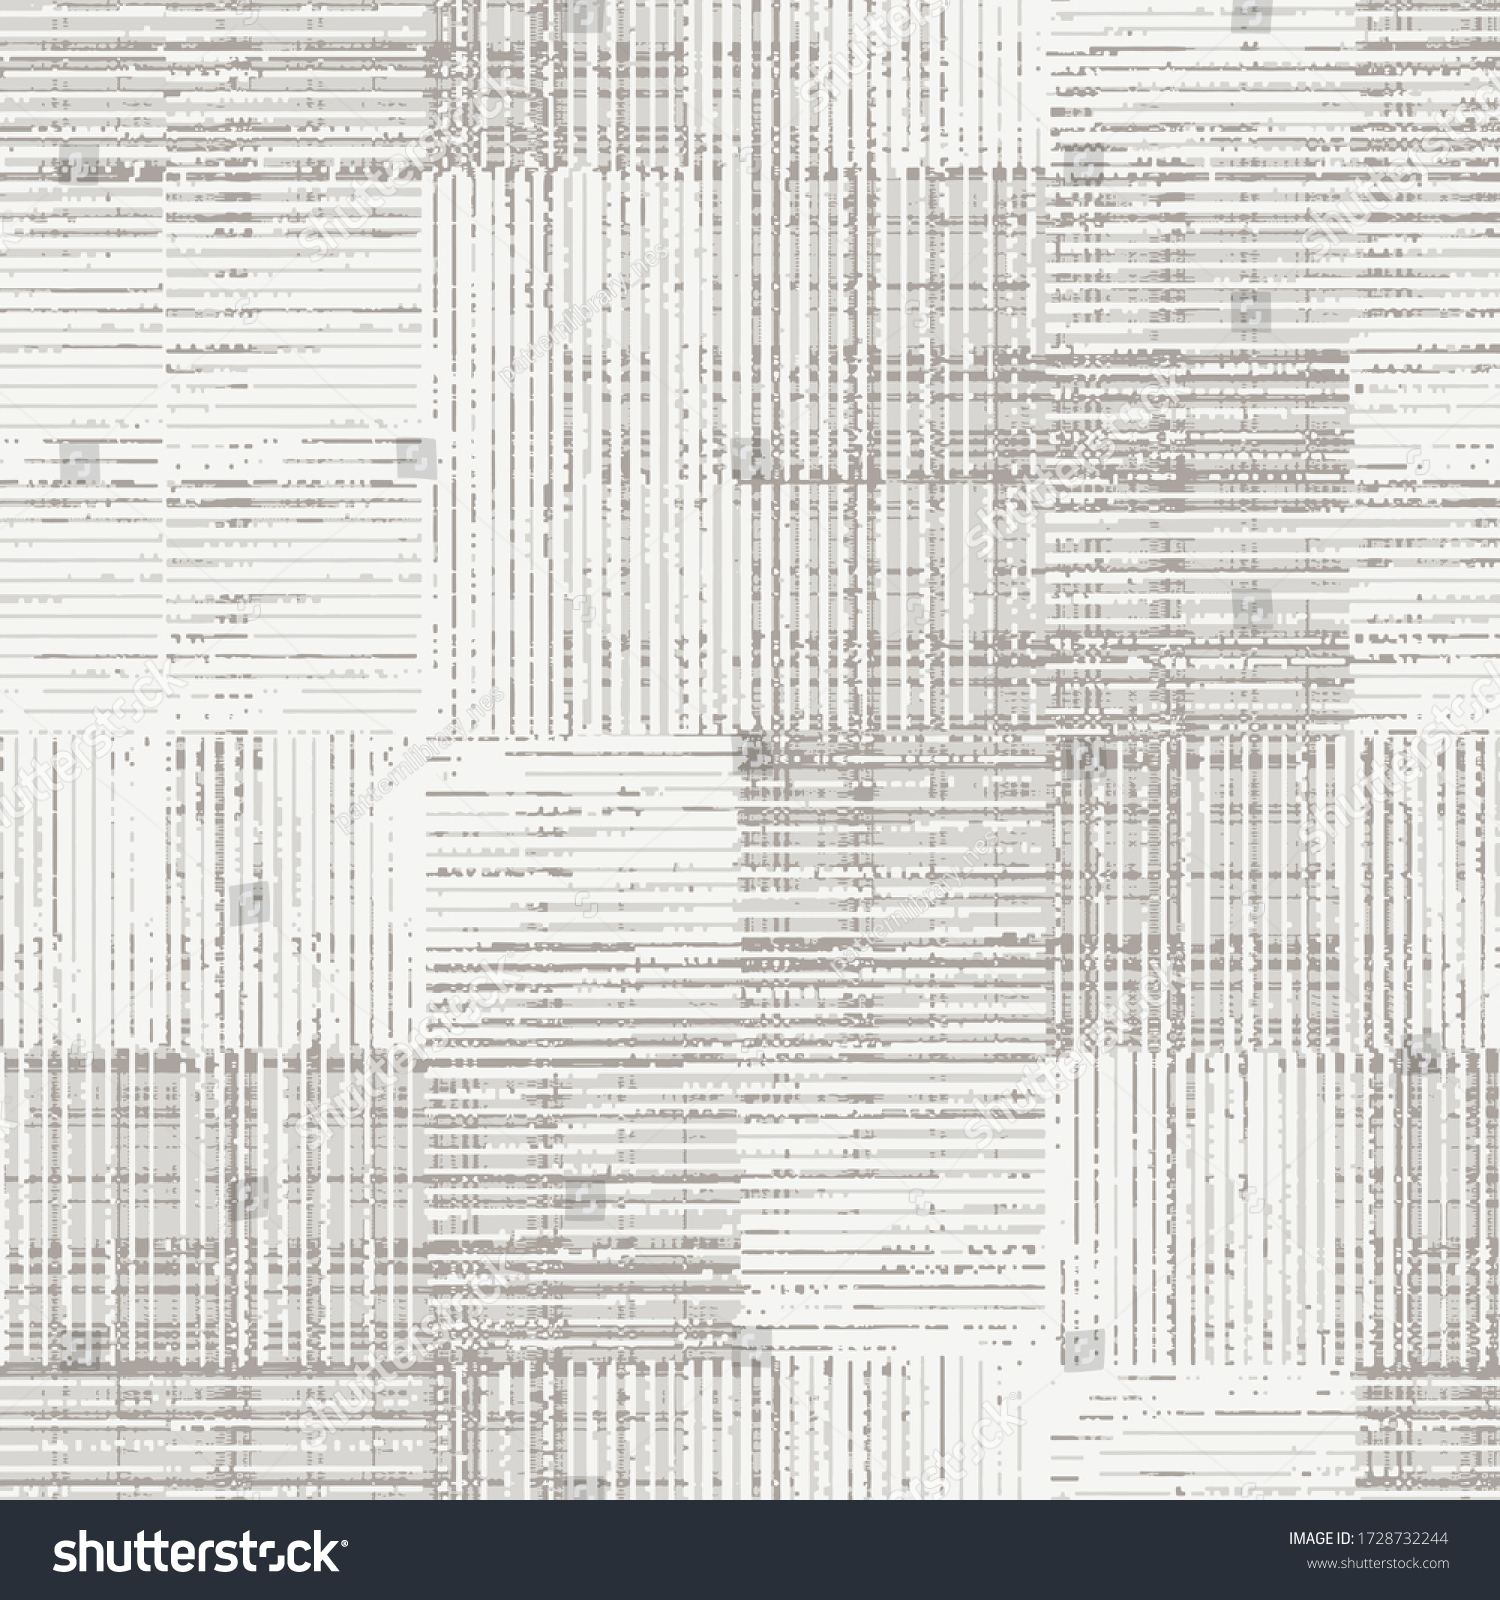 Fancy fabric linen, juta blended with wool washed coat surface jacquard  texture digital printing pattern design. Yarns for sports style Vector fabric seamless pattern. Abstract natural textured  #1728732244